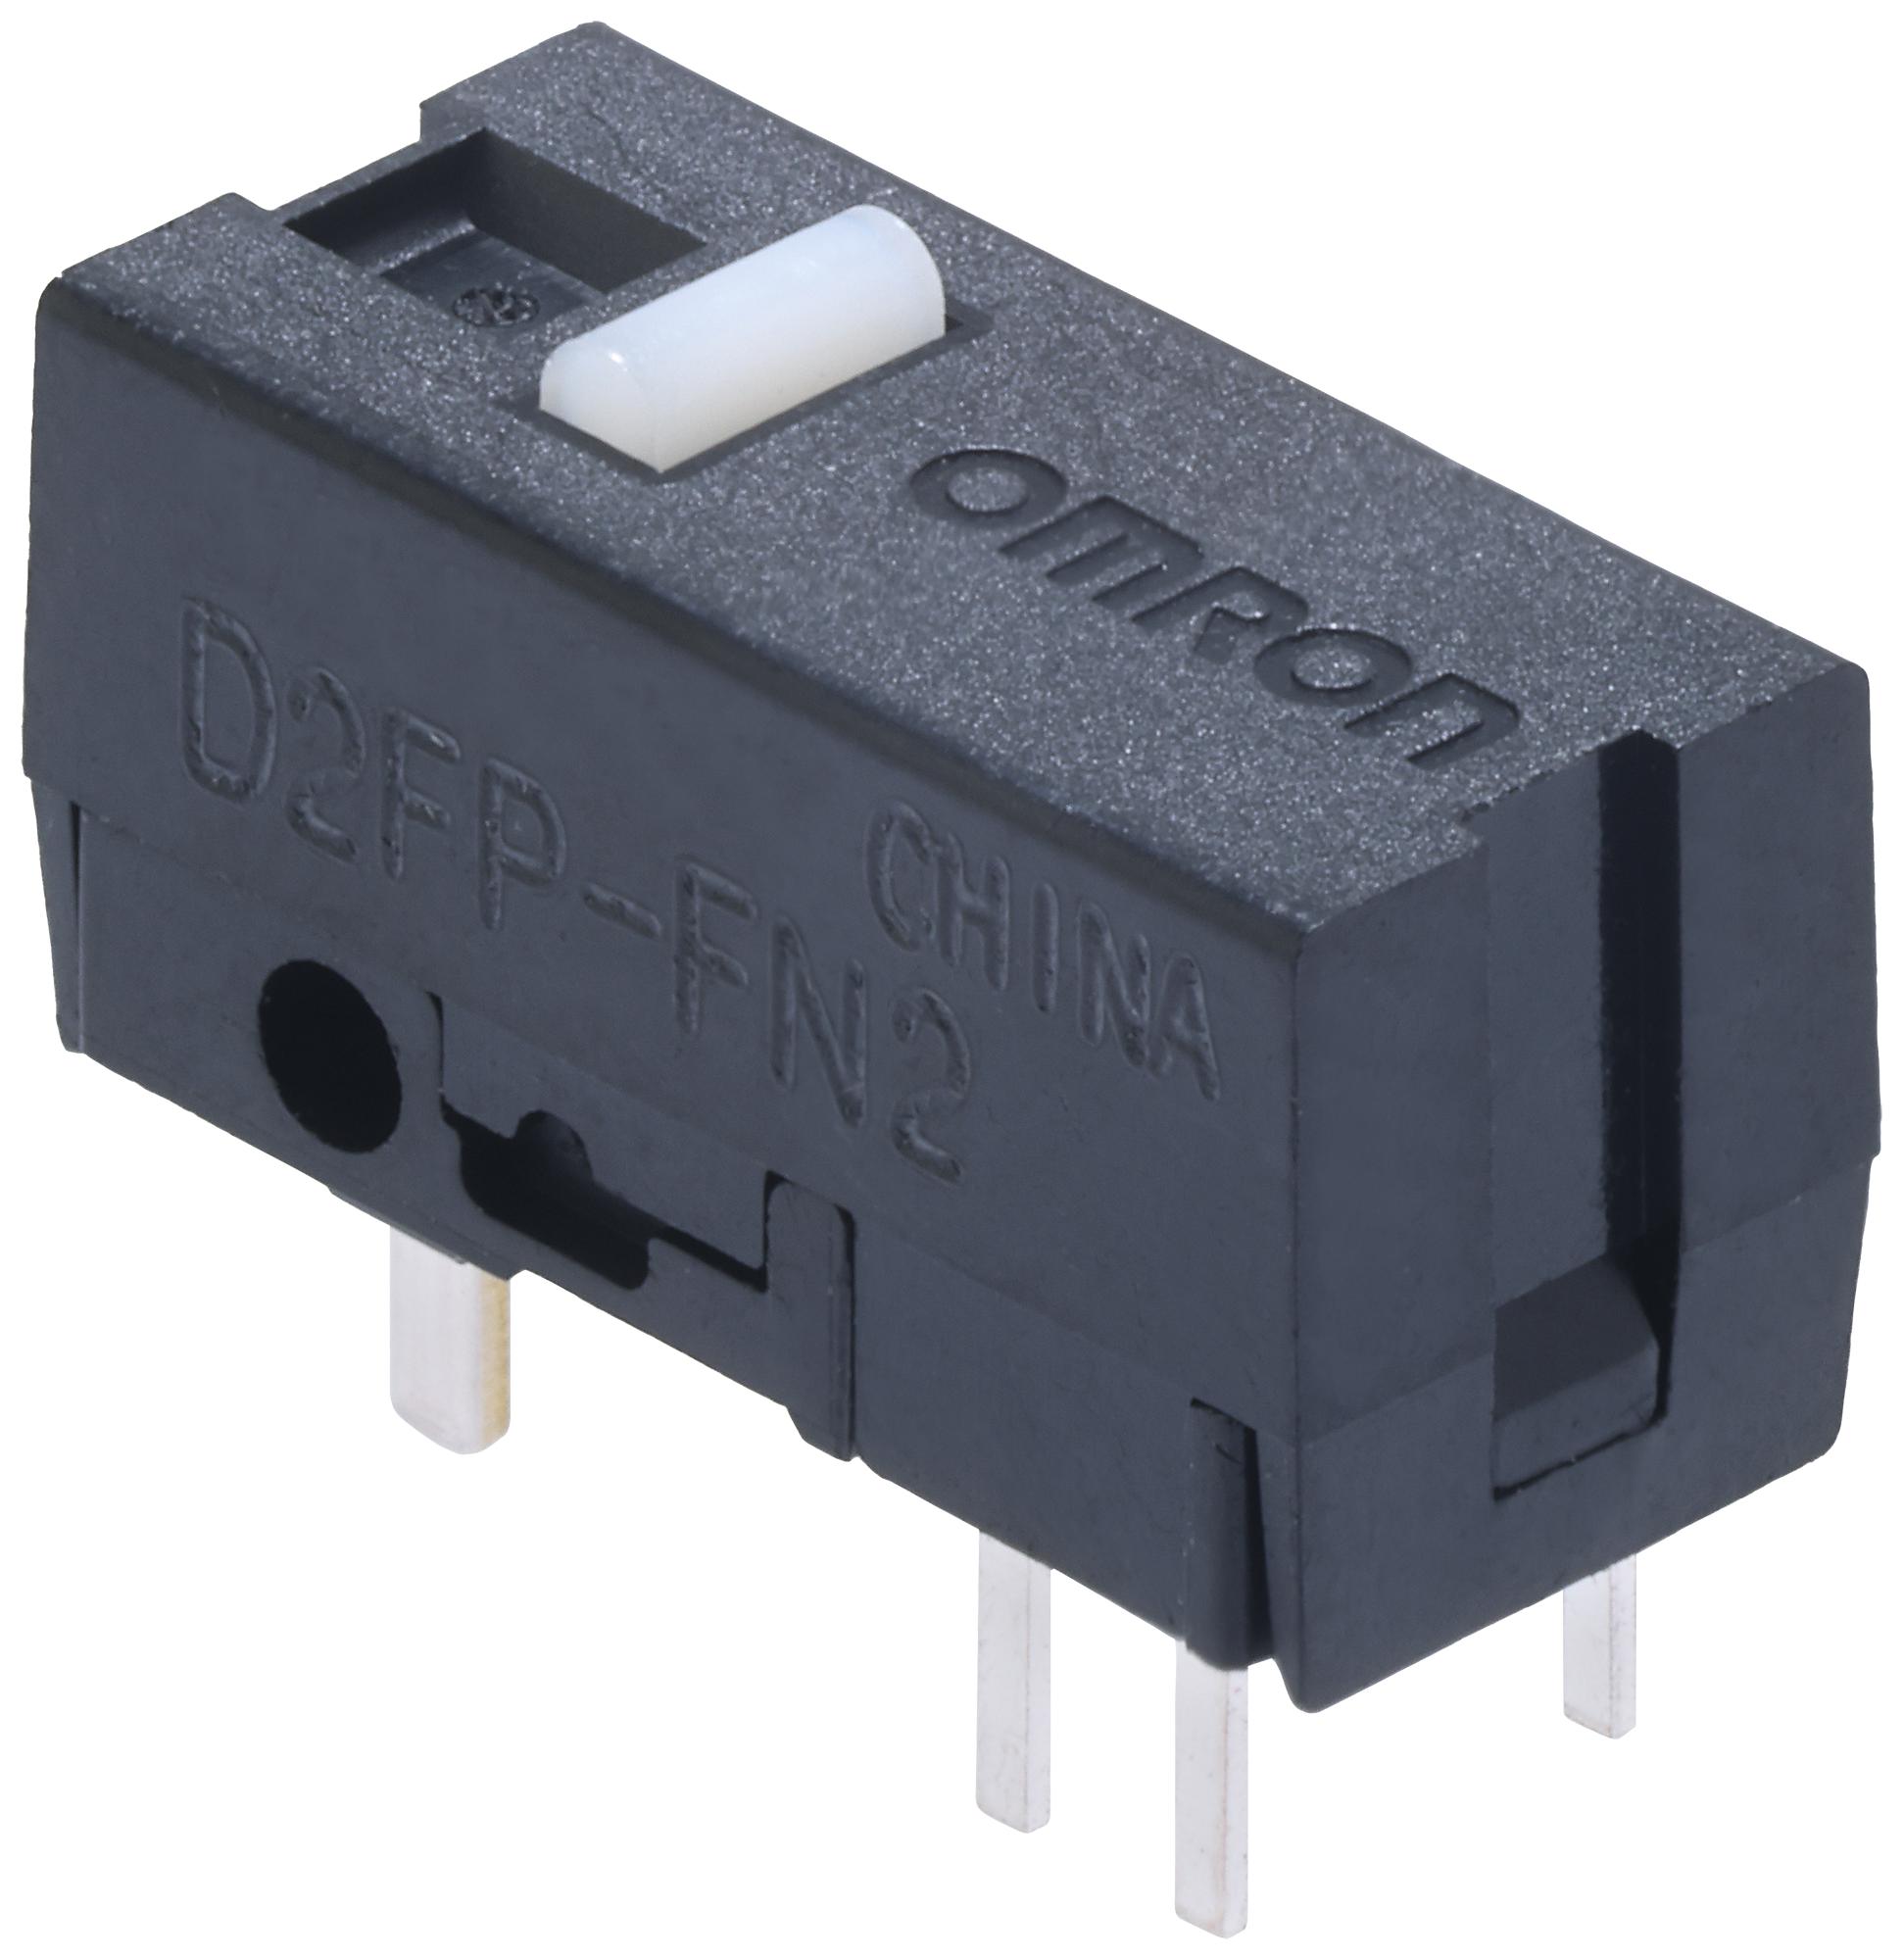 Omron Electronic Components D2Fp-Fn2(Std) Basic Switch, Spst-No, 0.02A, 30V